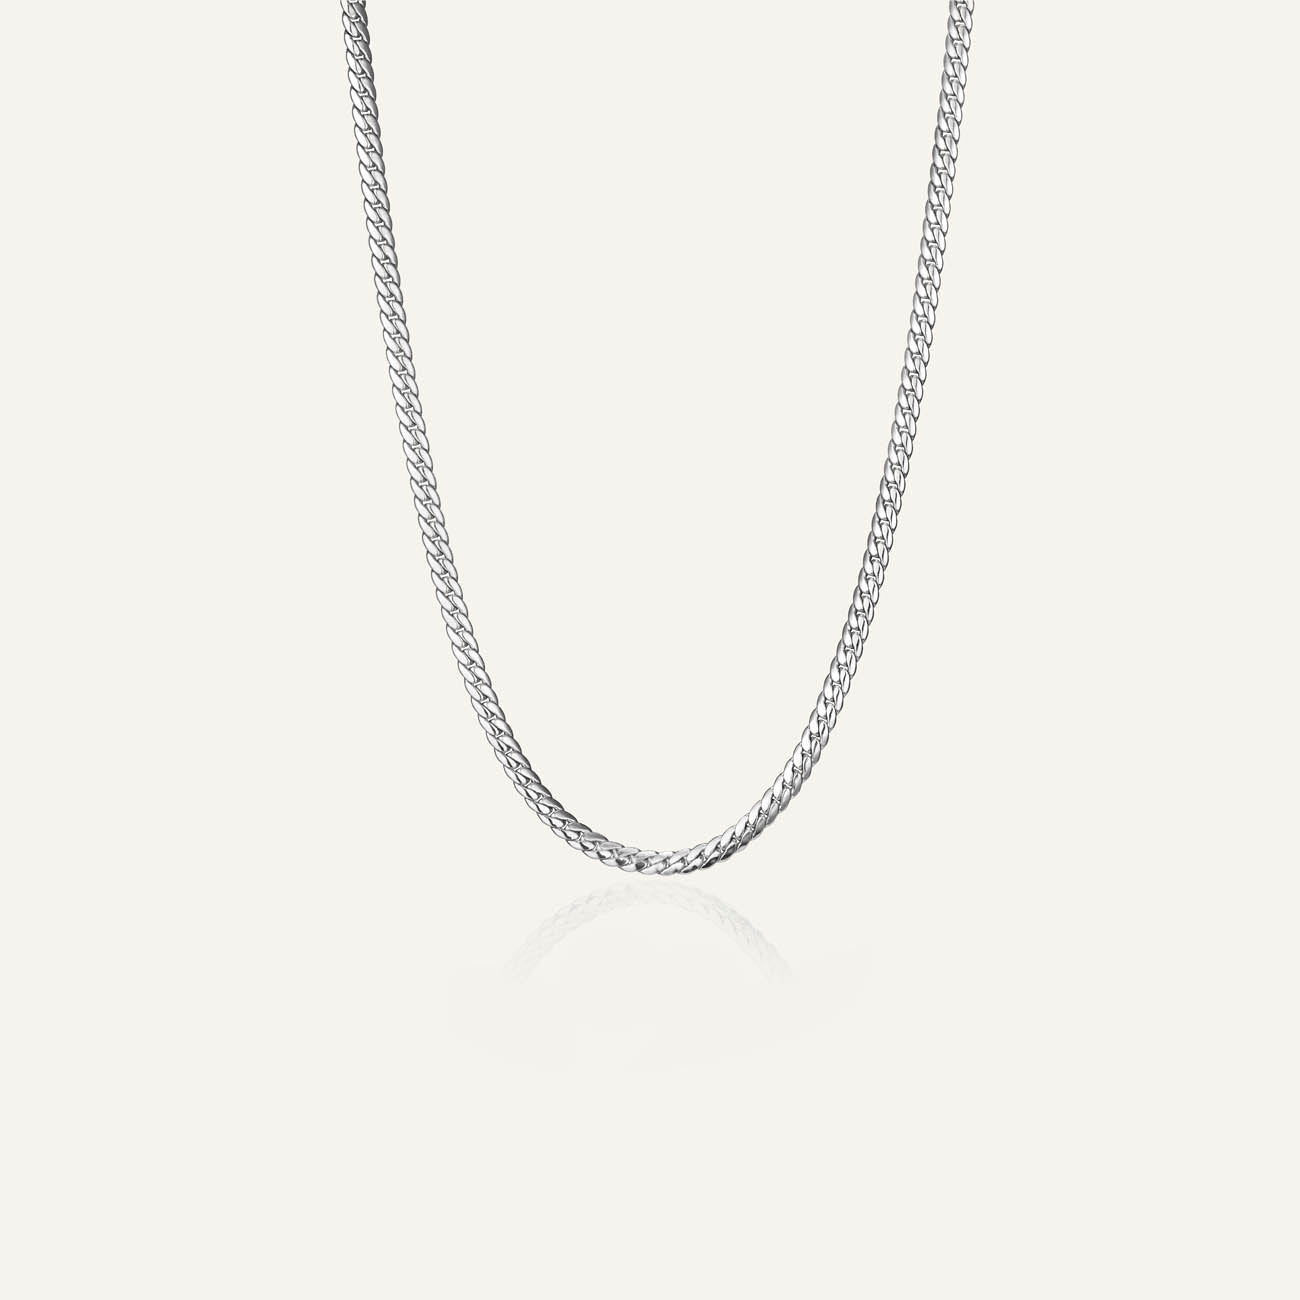 WALLACE CHAIN - SILVER